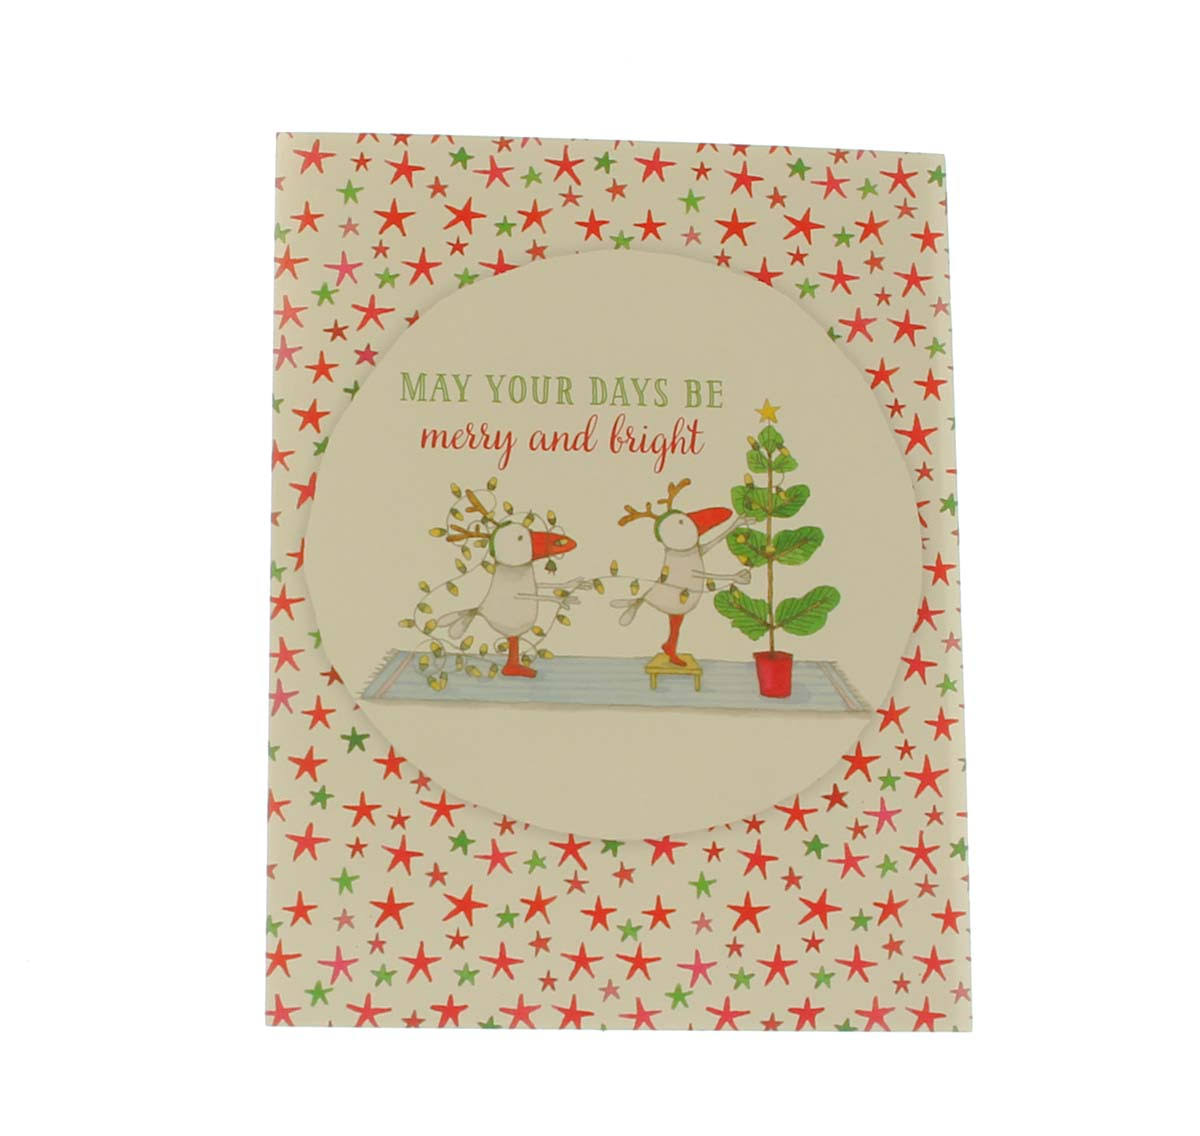 Christmas Cards, May Your Days Be merry..., Box of 12